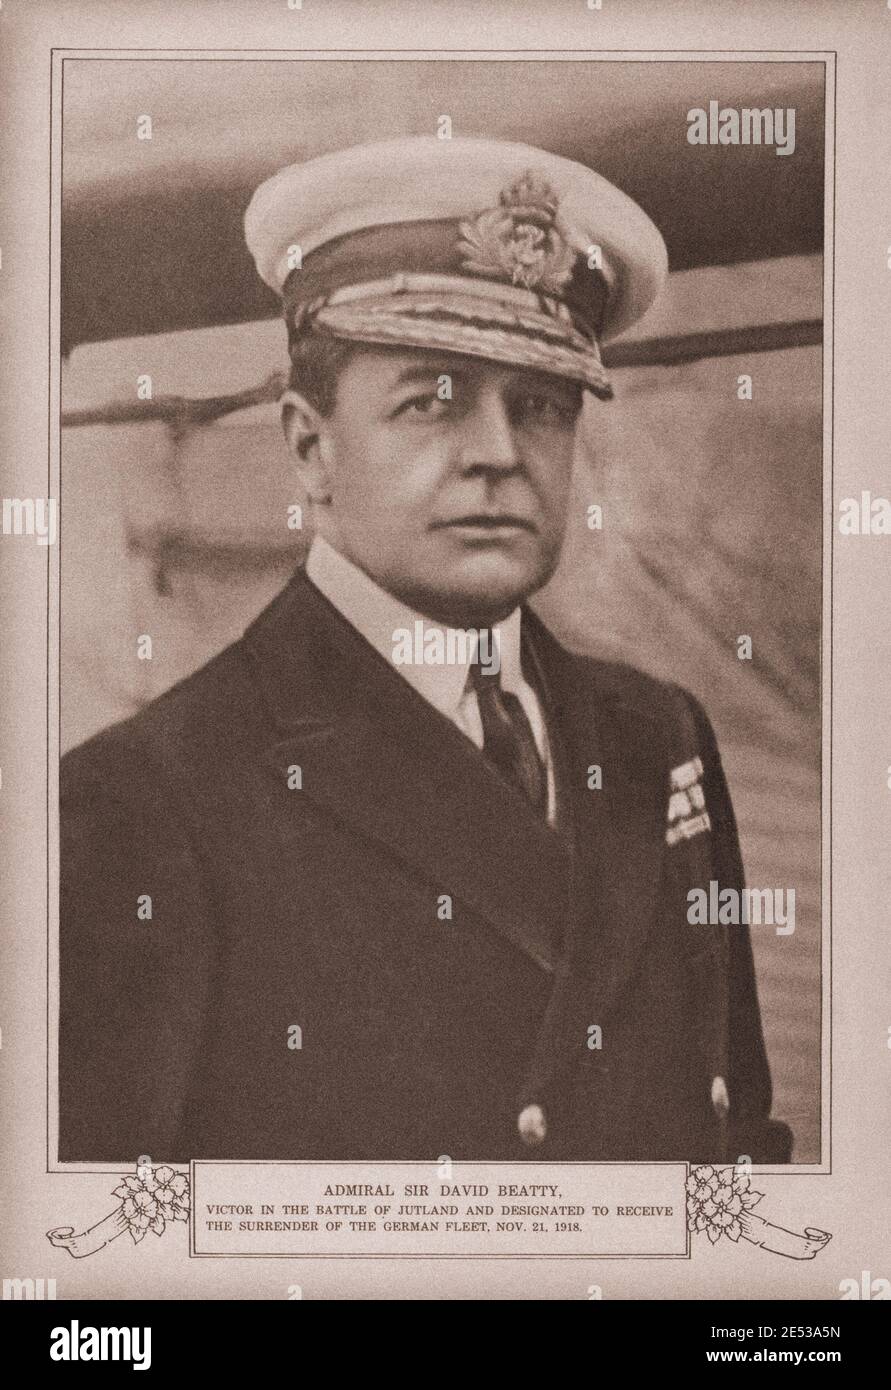 David Richard Beatty, 1st Earl Beatty, (17 January 1871 – 12 March 1936) was a Royal Navy officer. After serving in the Mahdist War and then the respo Stock Photo